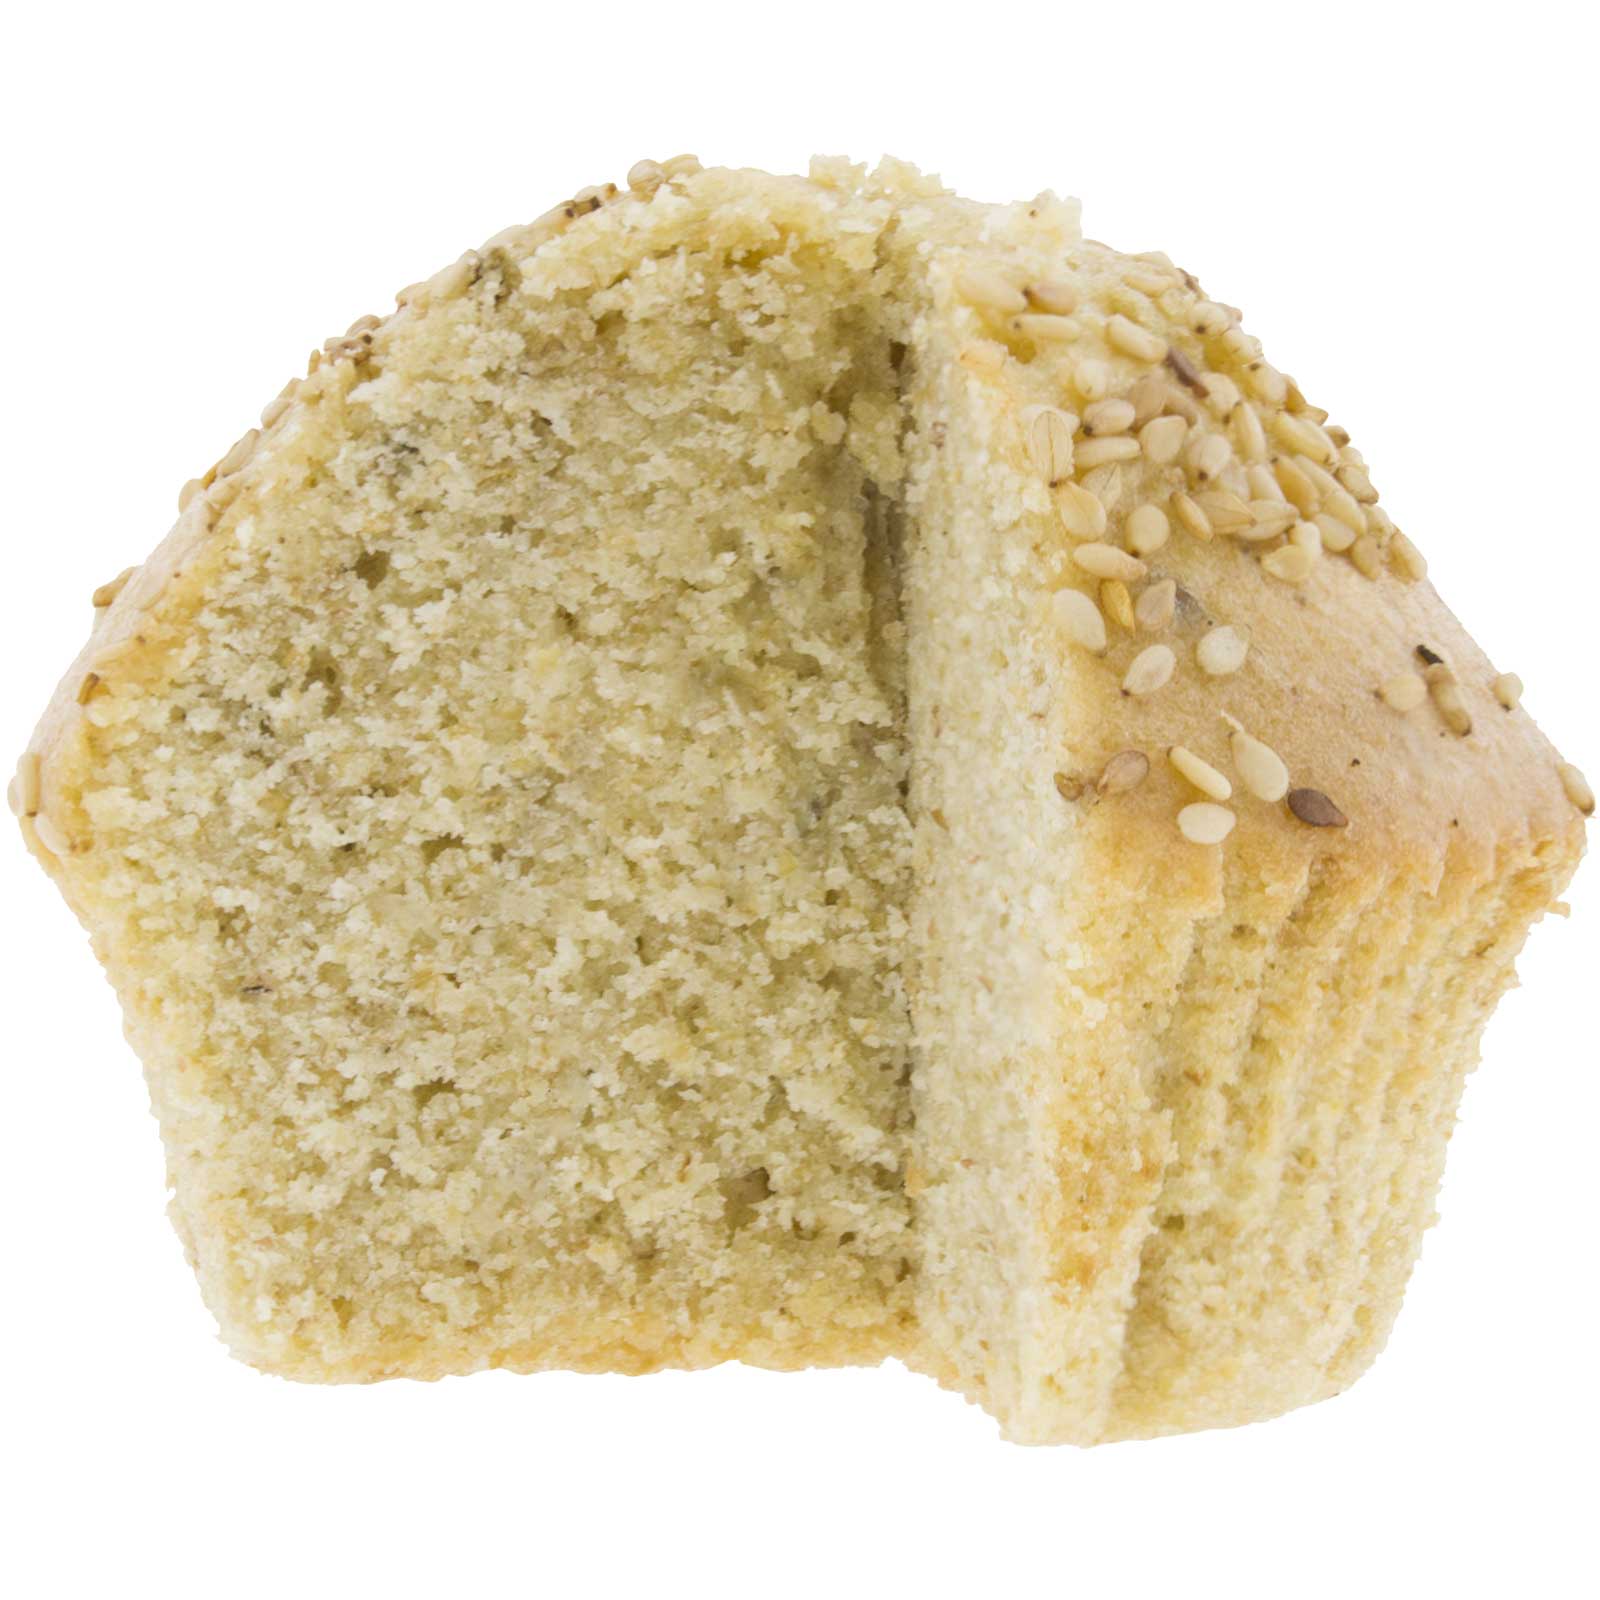 Cupcakes of wheat Khorasan Kamut® integral with ecological sesame 125g (2 units)